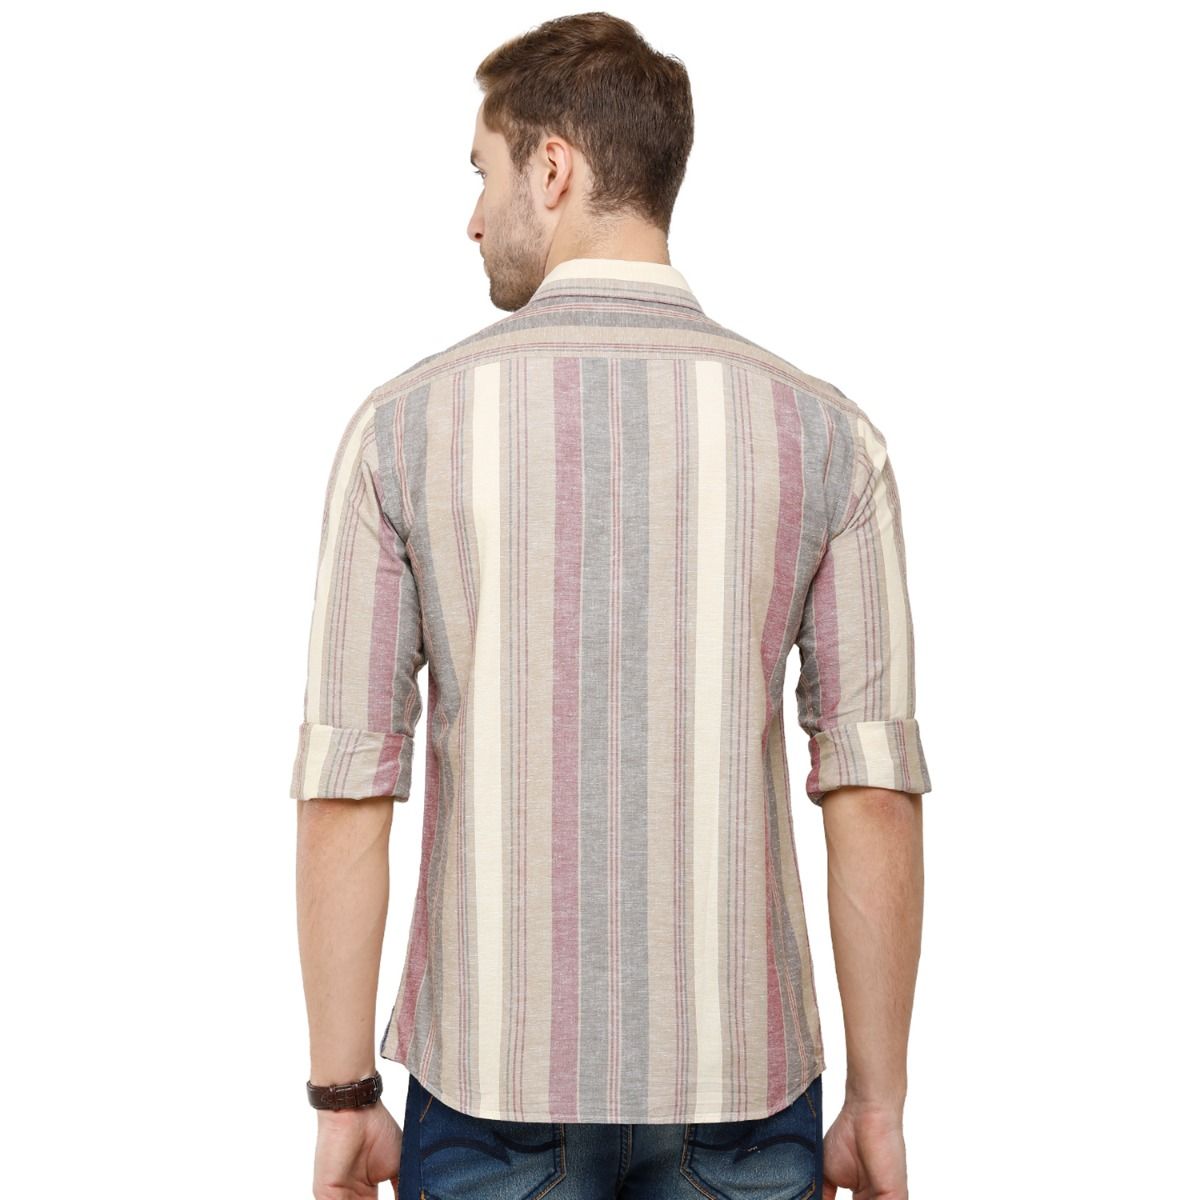 Cavallo By Linen Club Men's Cotton Linen Multicolor Striped Regular Fit  Full Sleeve Casual Shirt